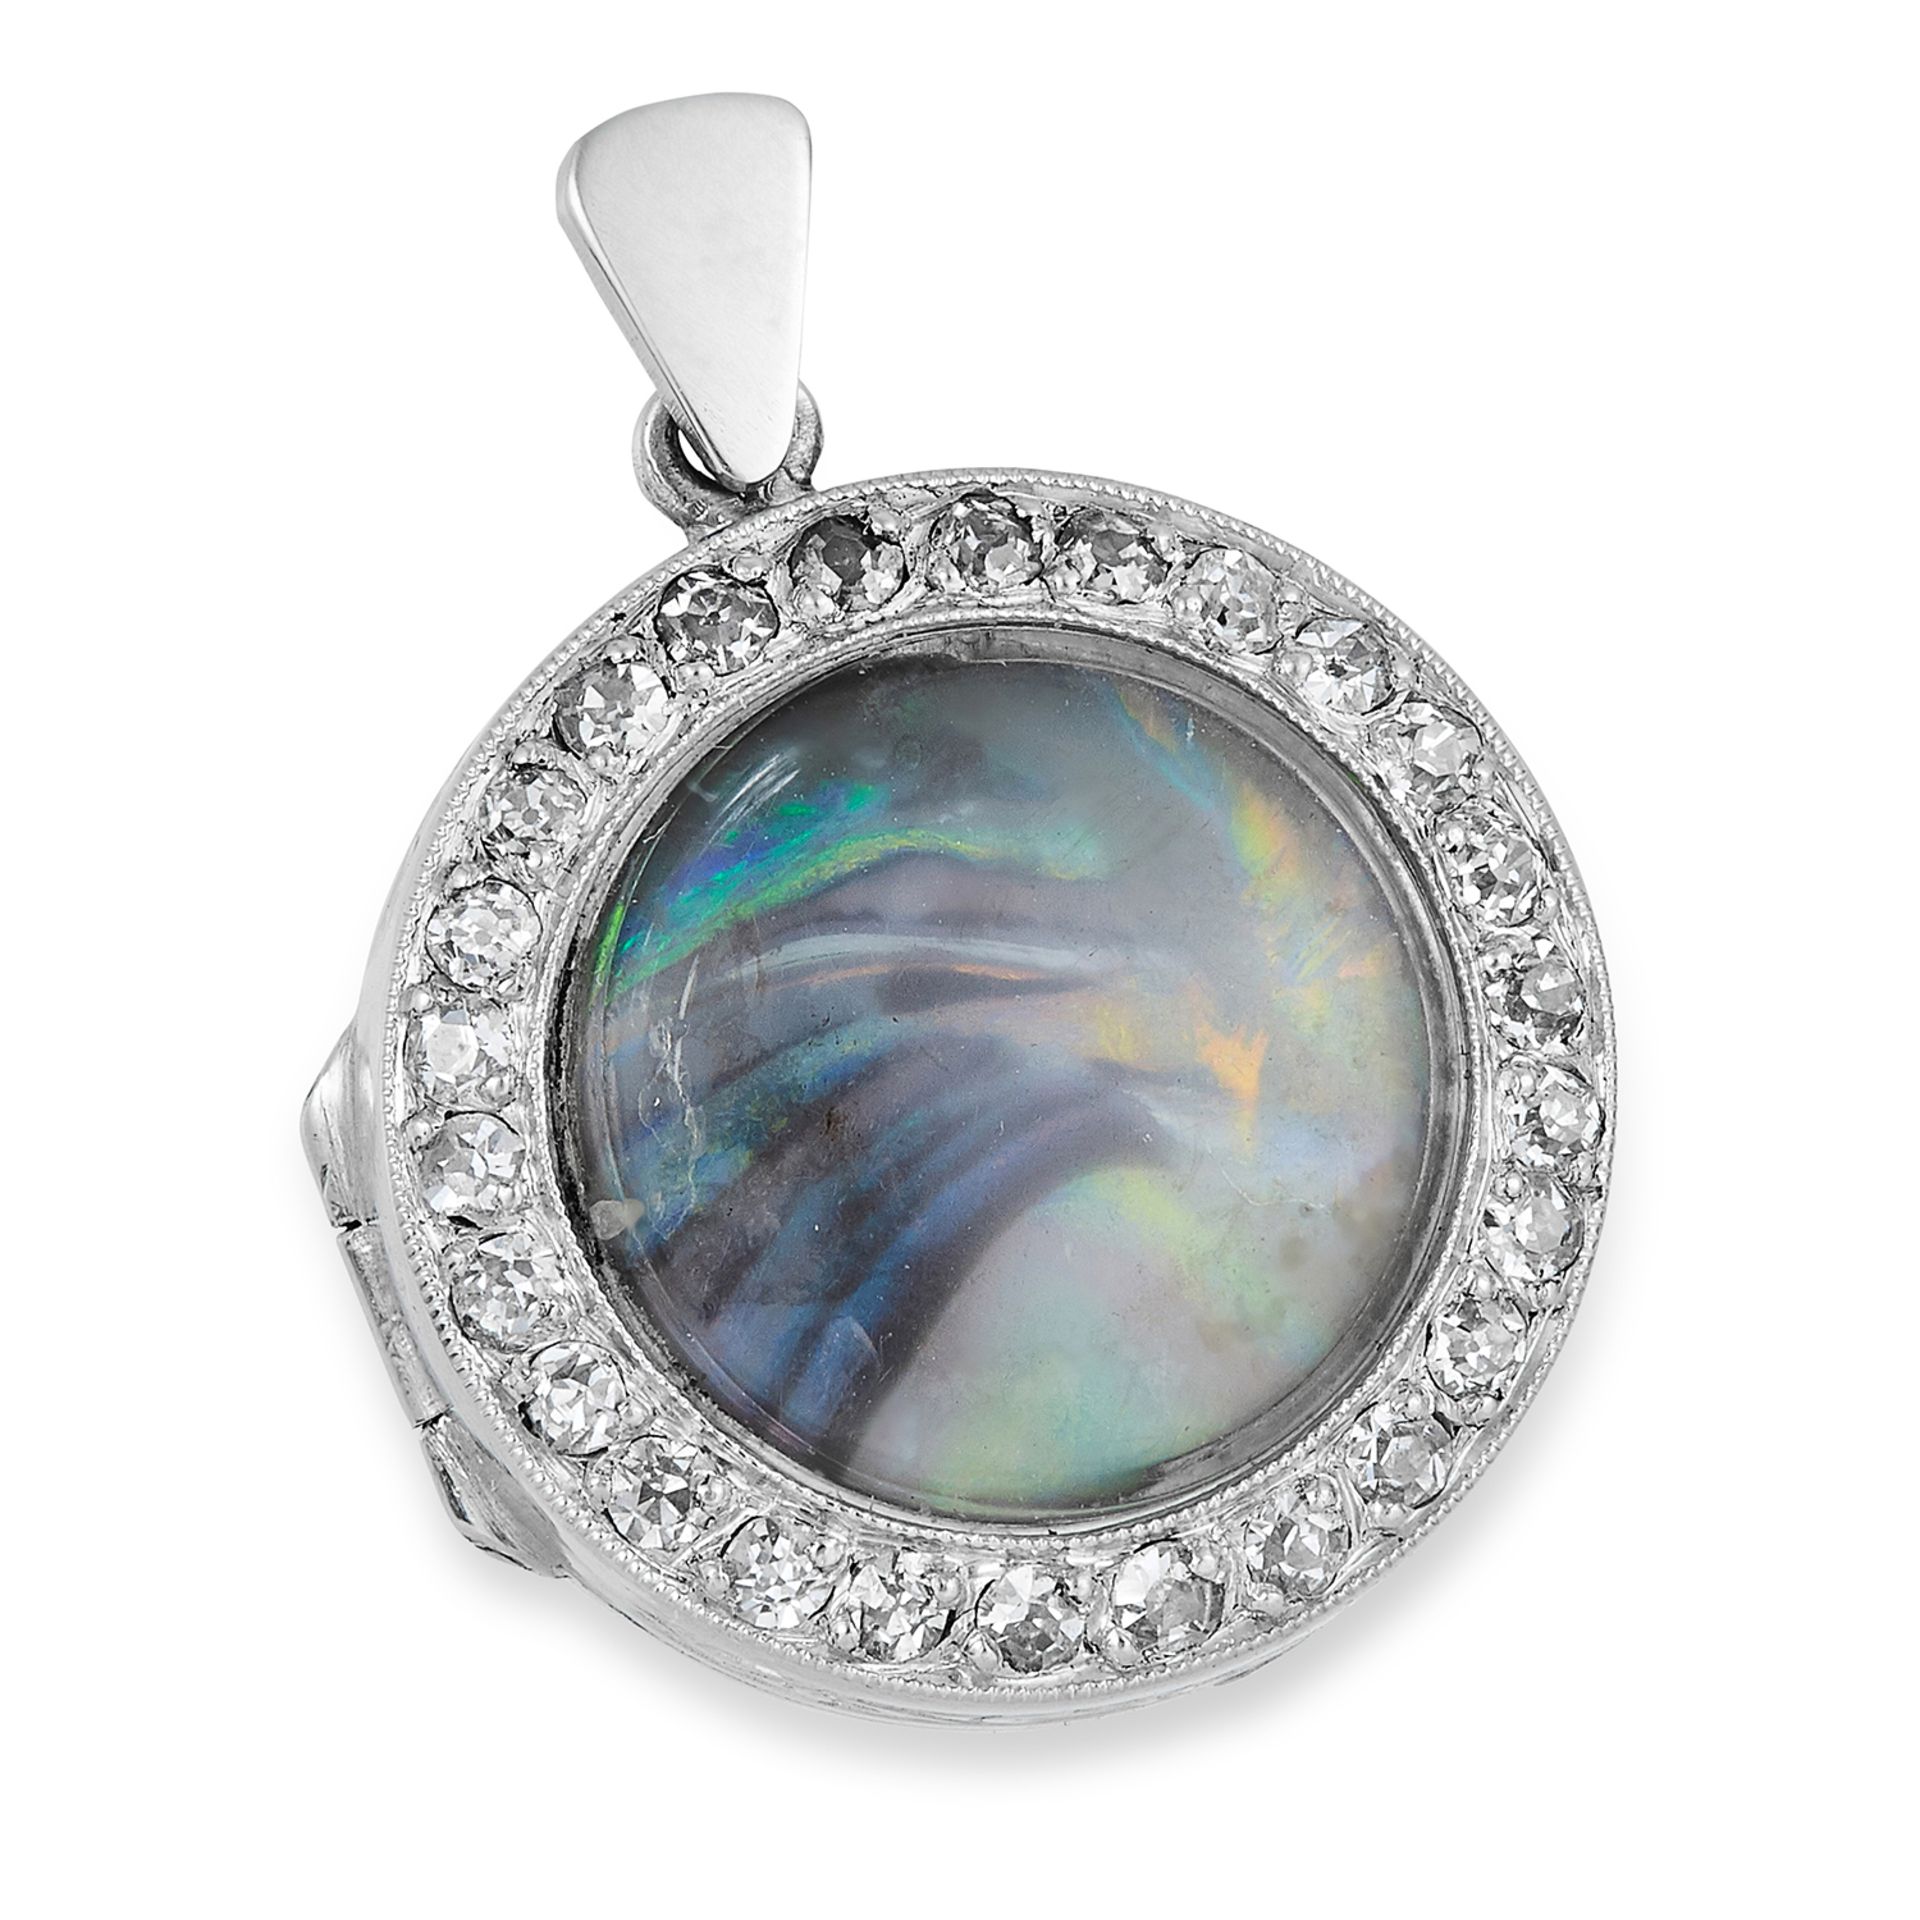 ART DECO OPAL AND DIAMOND PENDANT, set with an opal in a border of round cut